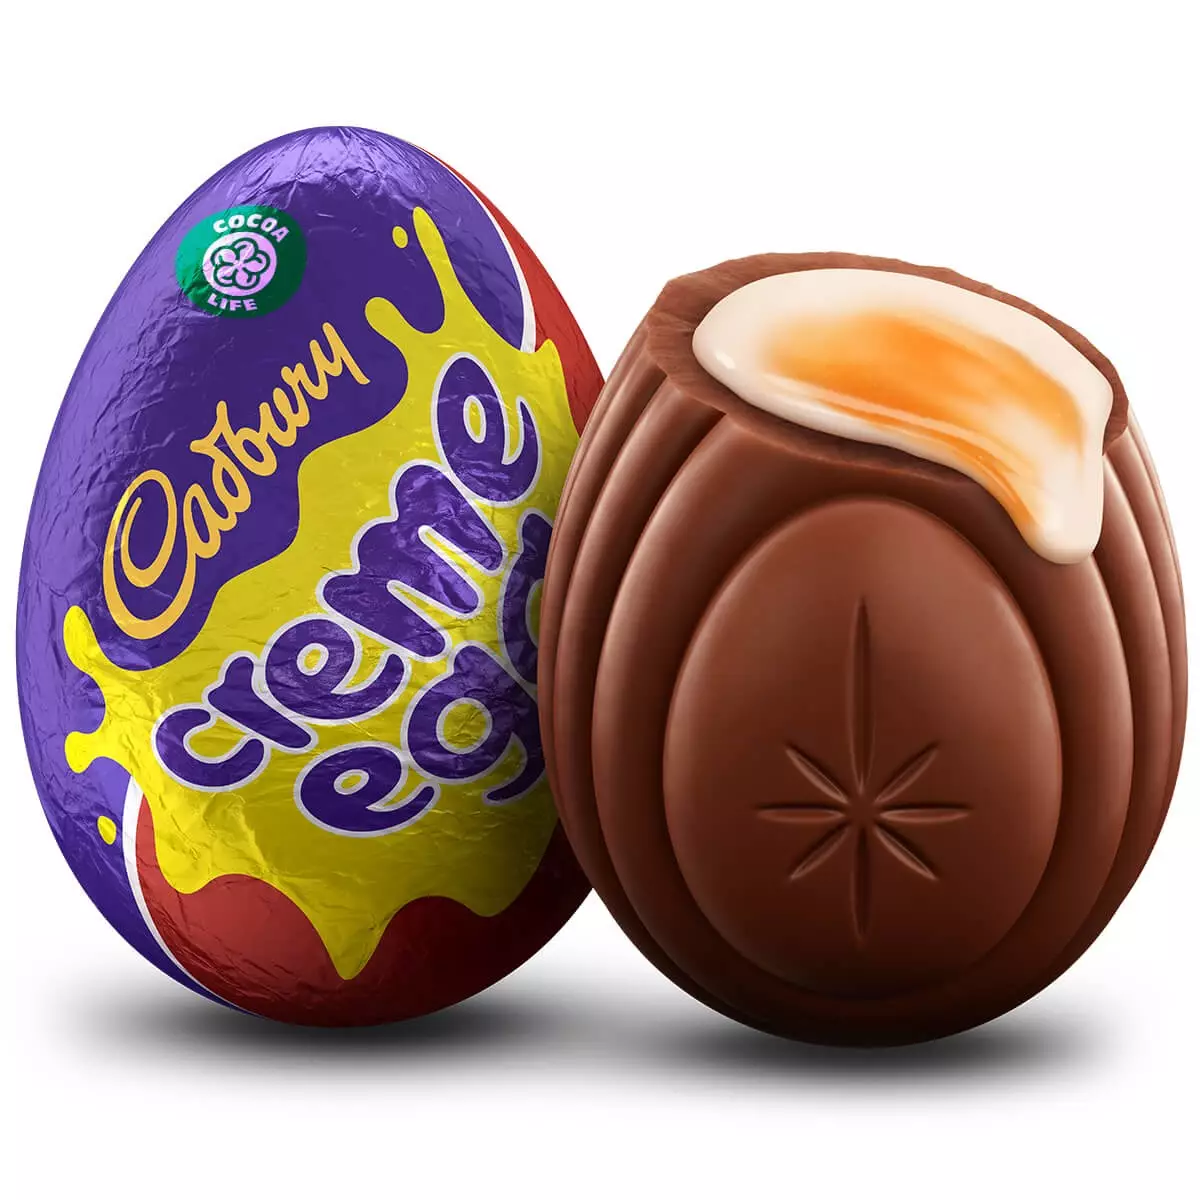 Cadbury's Creme Eggs are going for 25p in some stores.